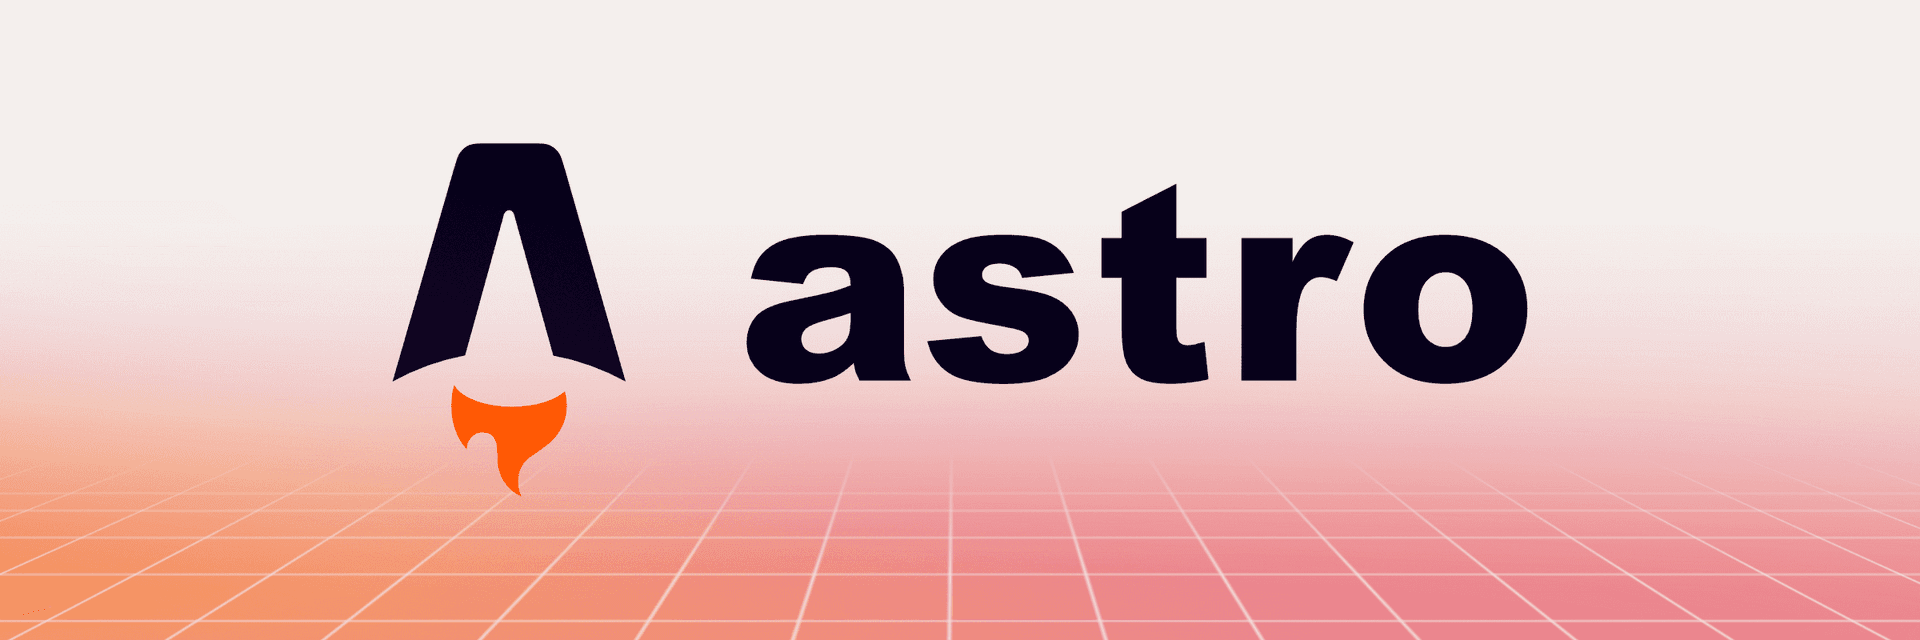 Introduction to Astro